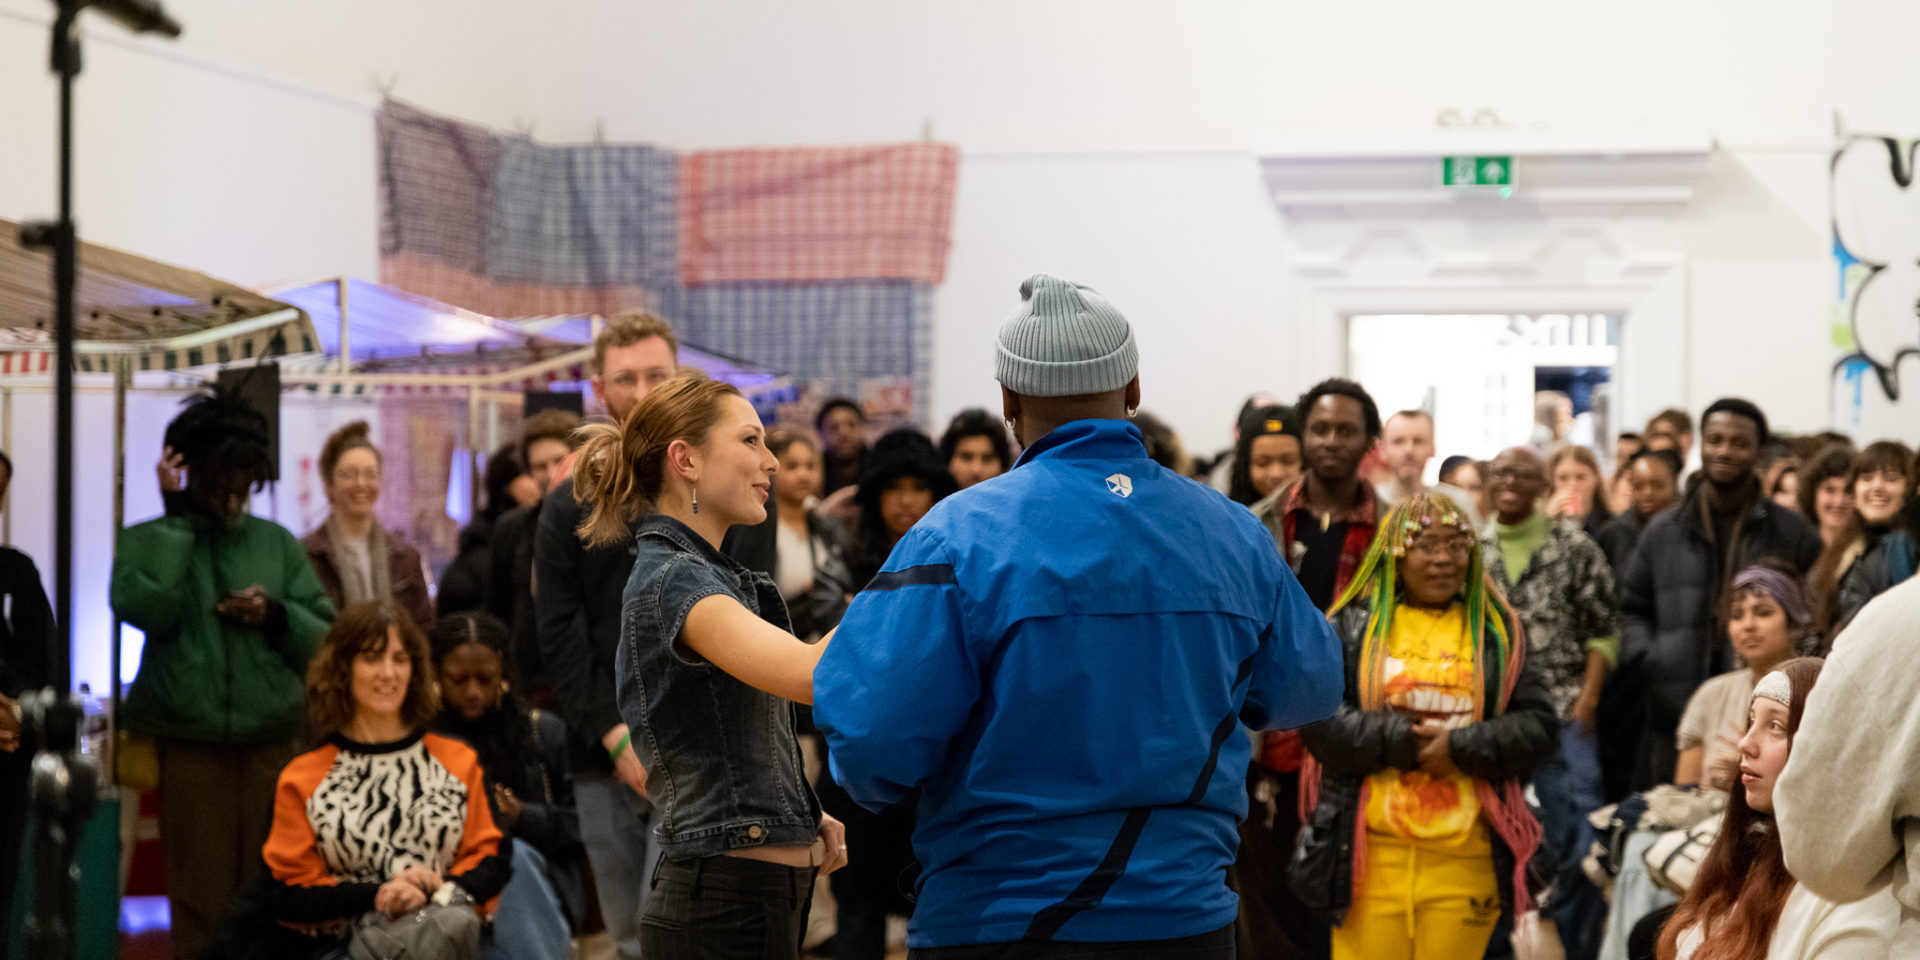 Two people stand in front of a crowd in a large, bright gallery space. The woman holds out a microphone to a man wearing a blue top, who is speaking to the crowd.